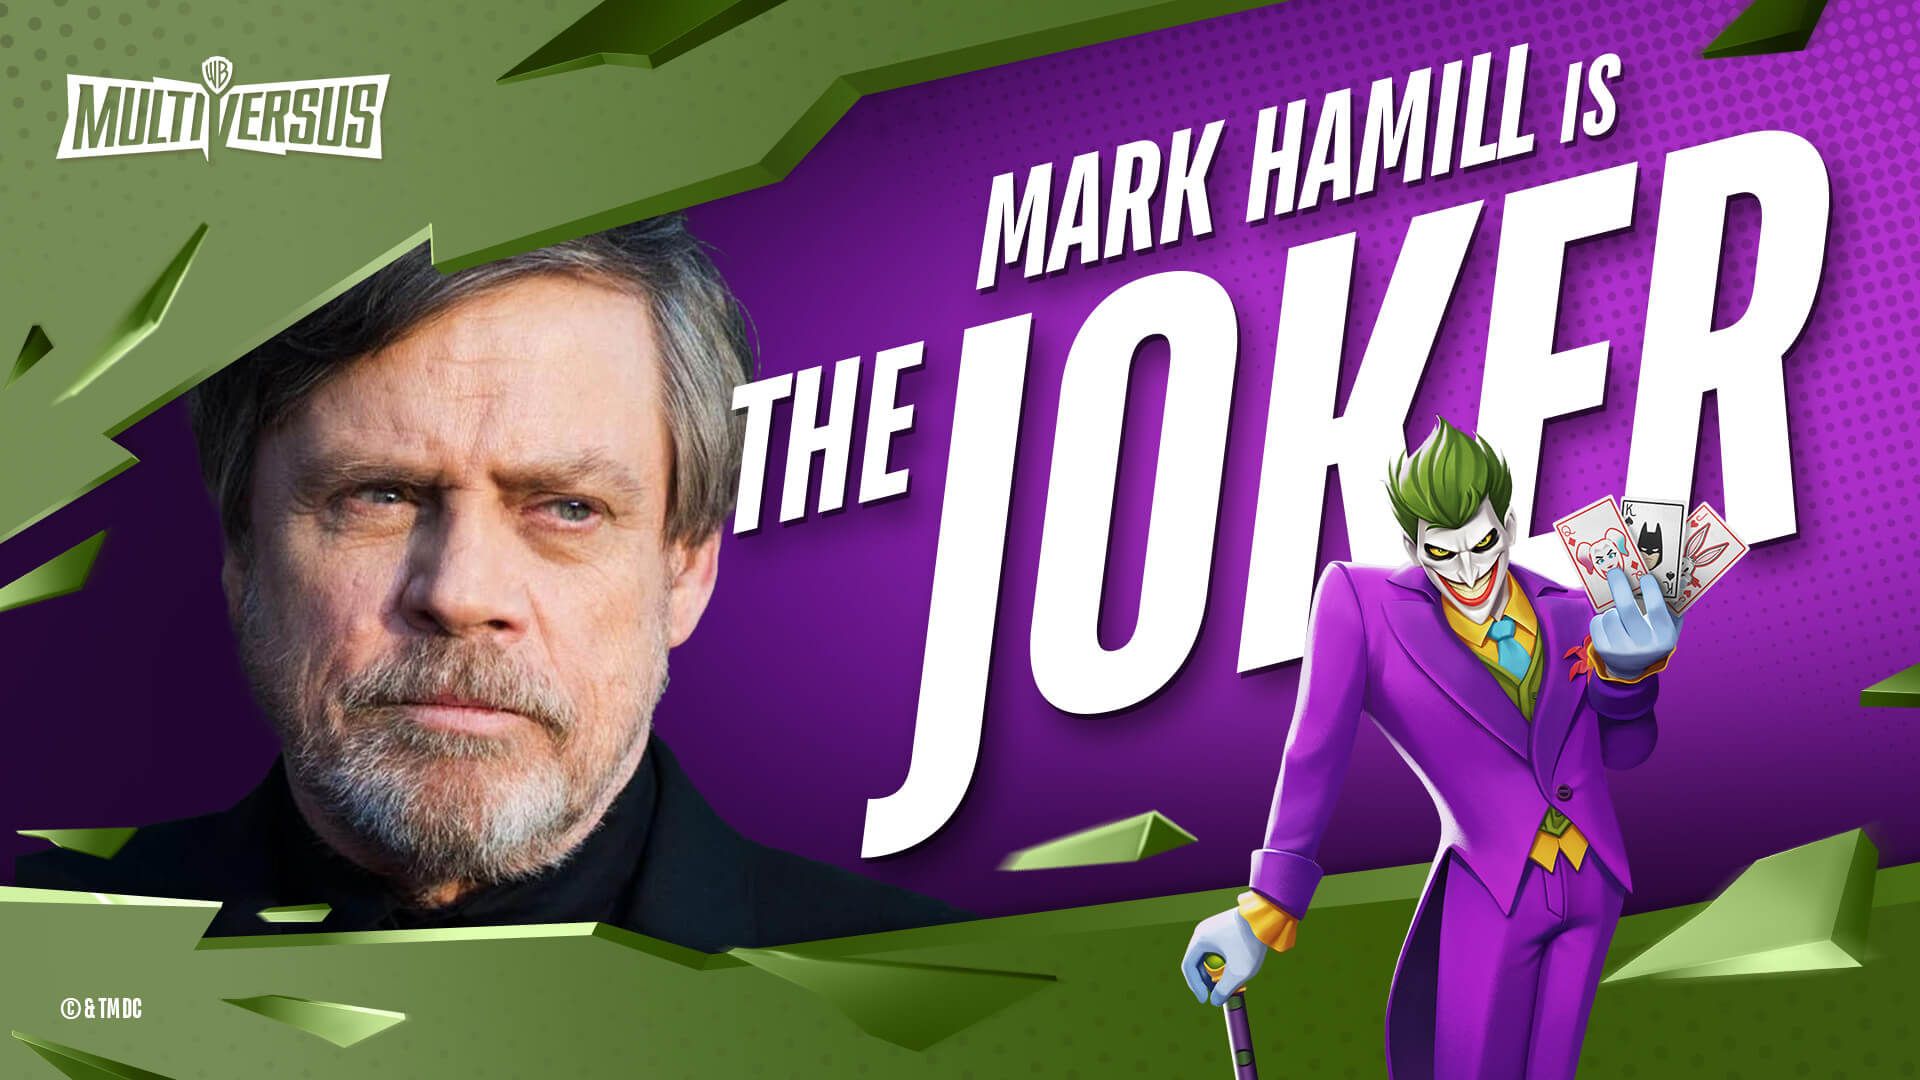 Mark Hamill Confirmed to be the Voice of MVS Joker